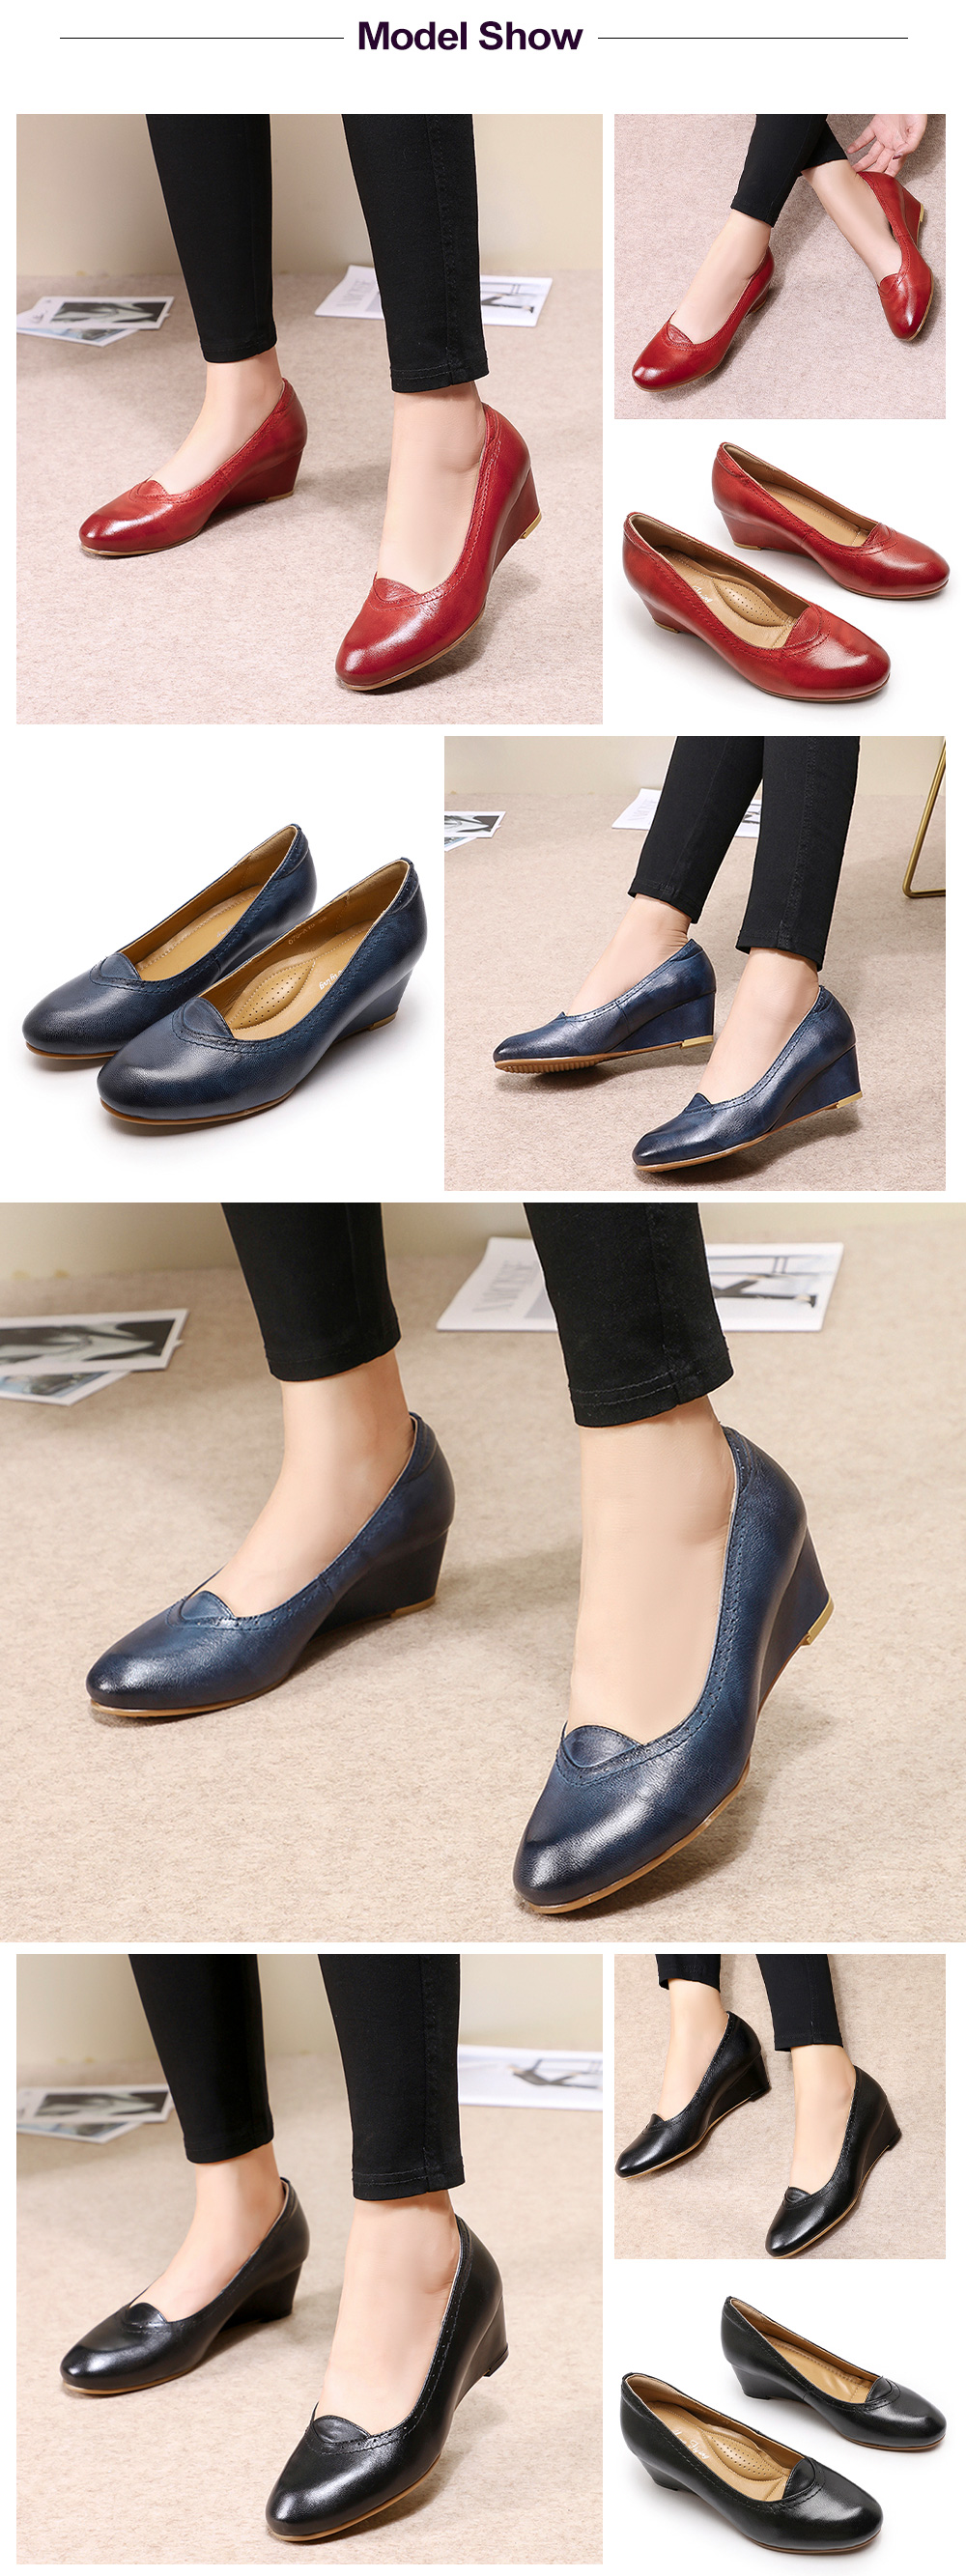 Mona Flying Women Solid Genuine Leather Wedge Pumps Shoes Handmade Slip-on Round-Toe High Heel Dress for Ladies New 078-A13